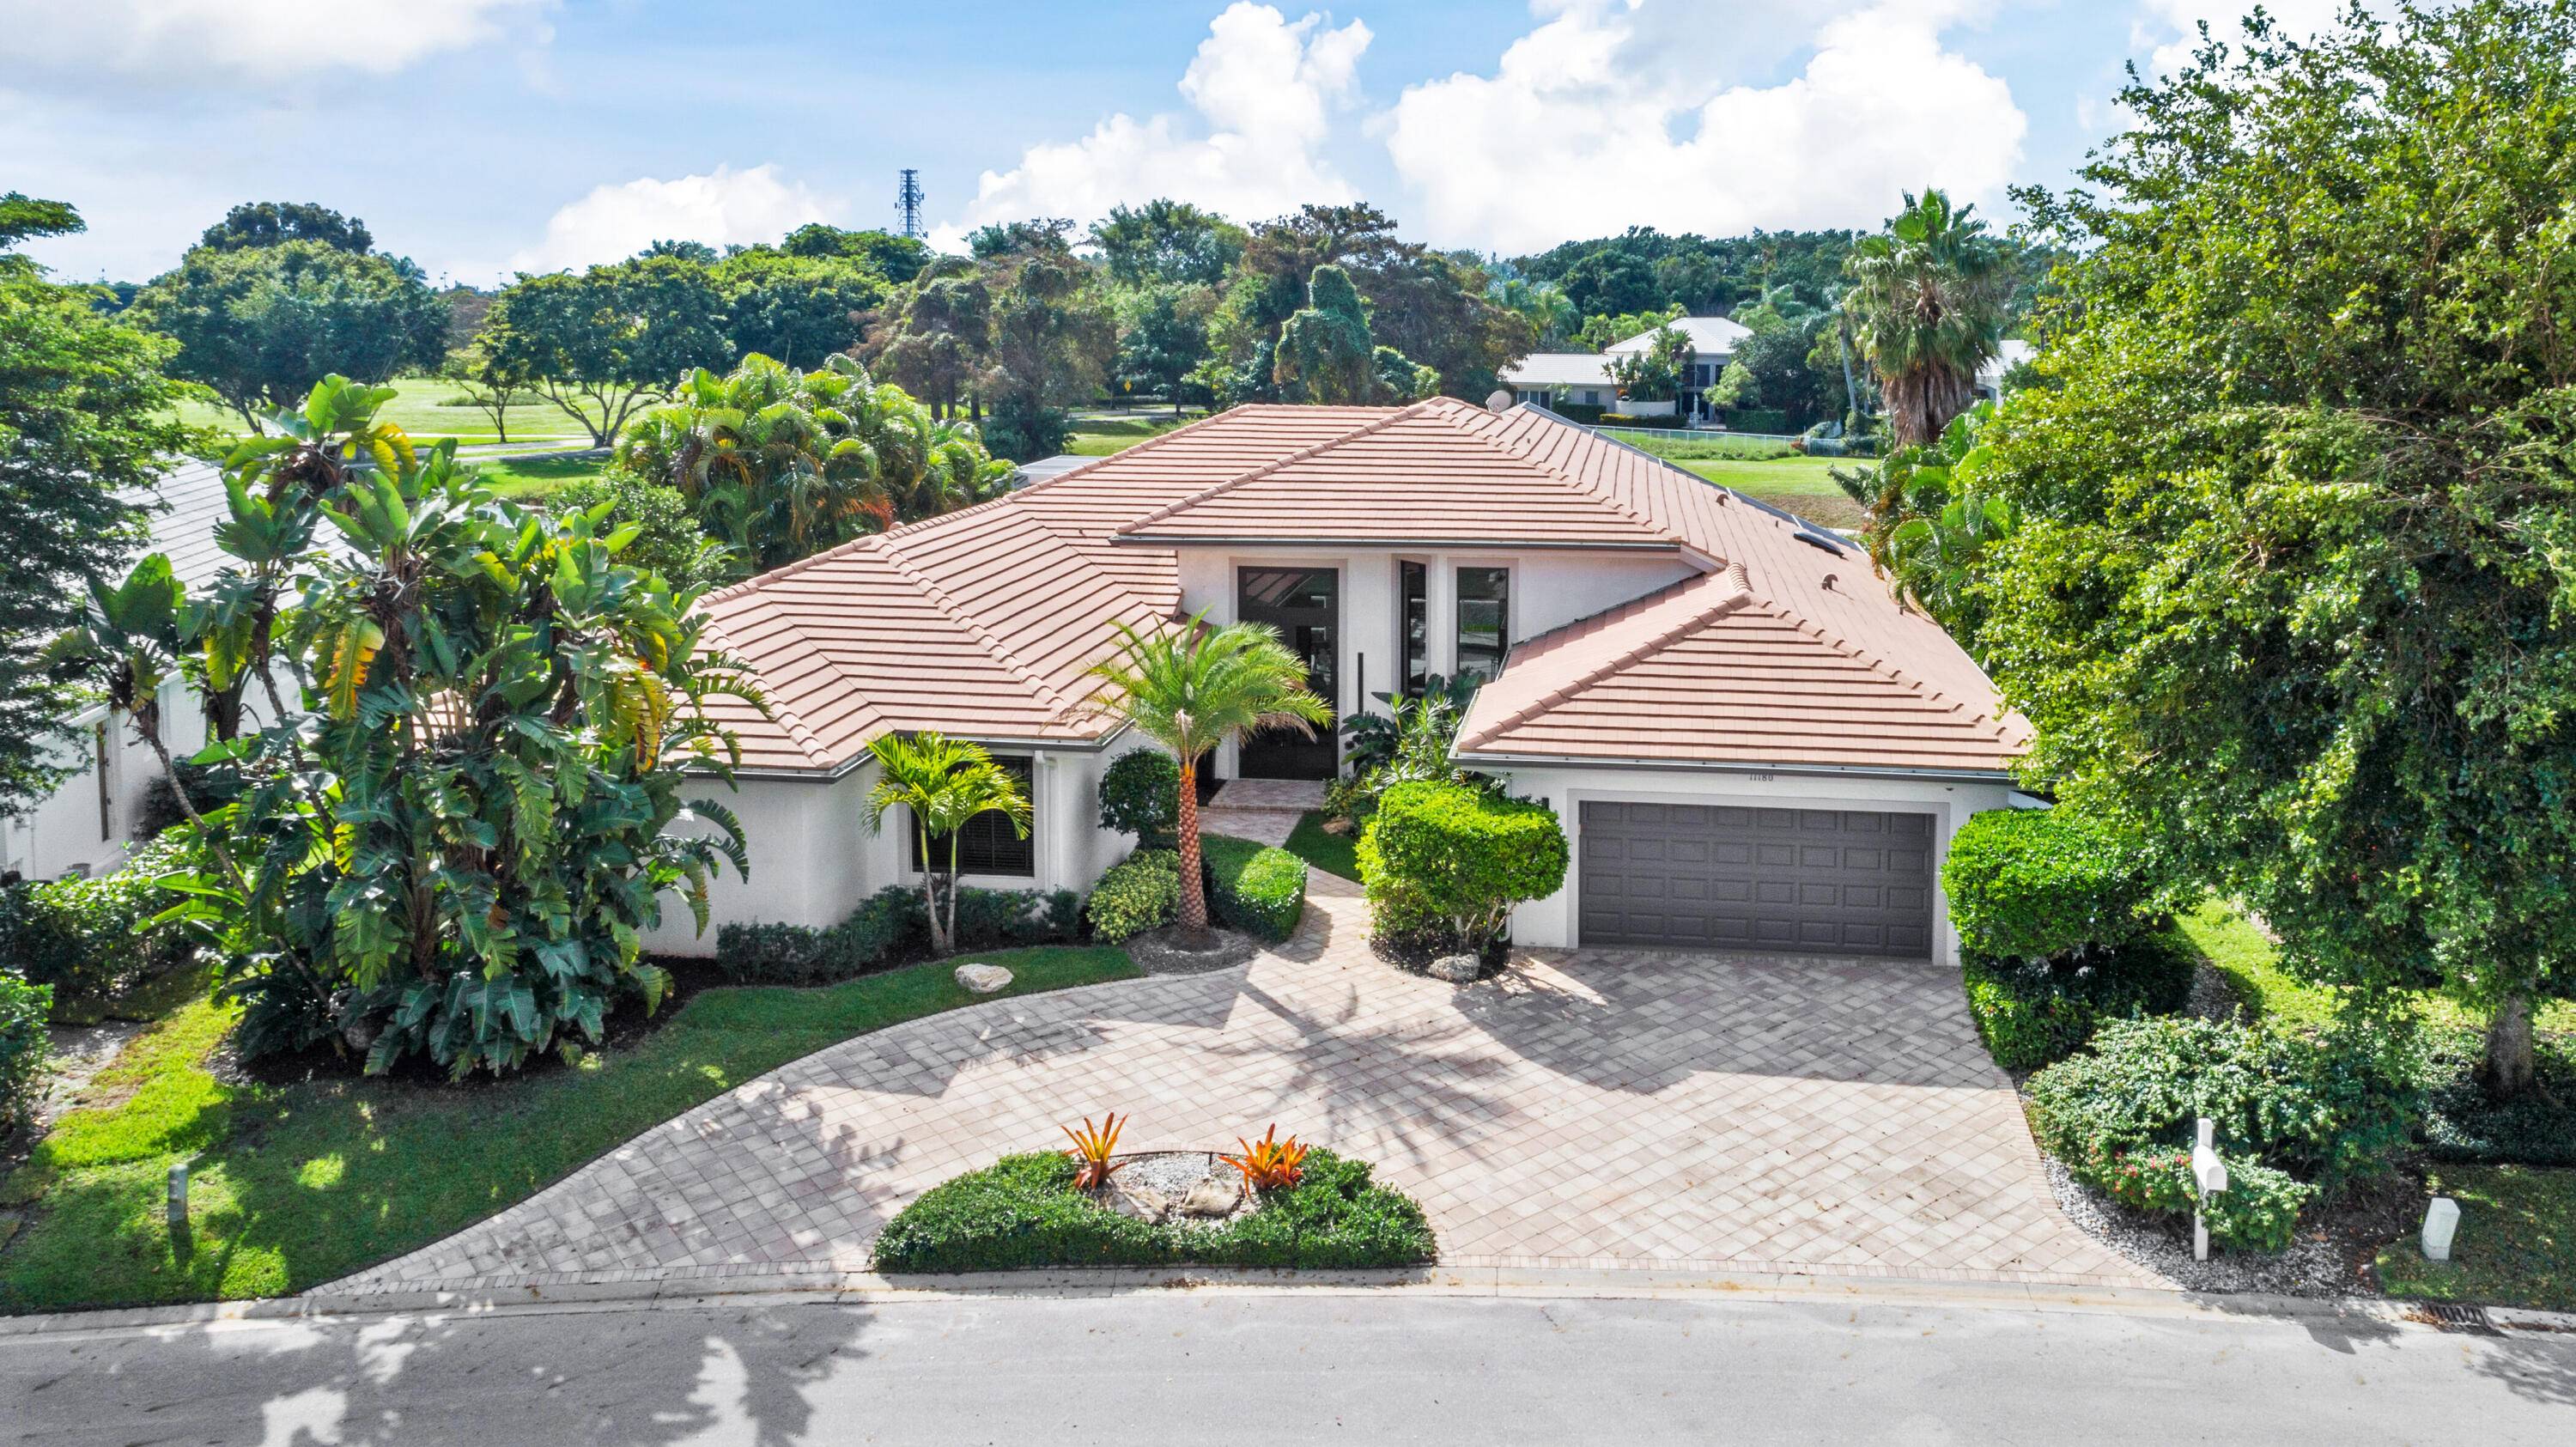 This magnificent home is located in the highly desirable neighborhood of Palm Beach Polo.